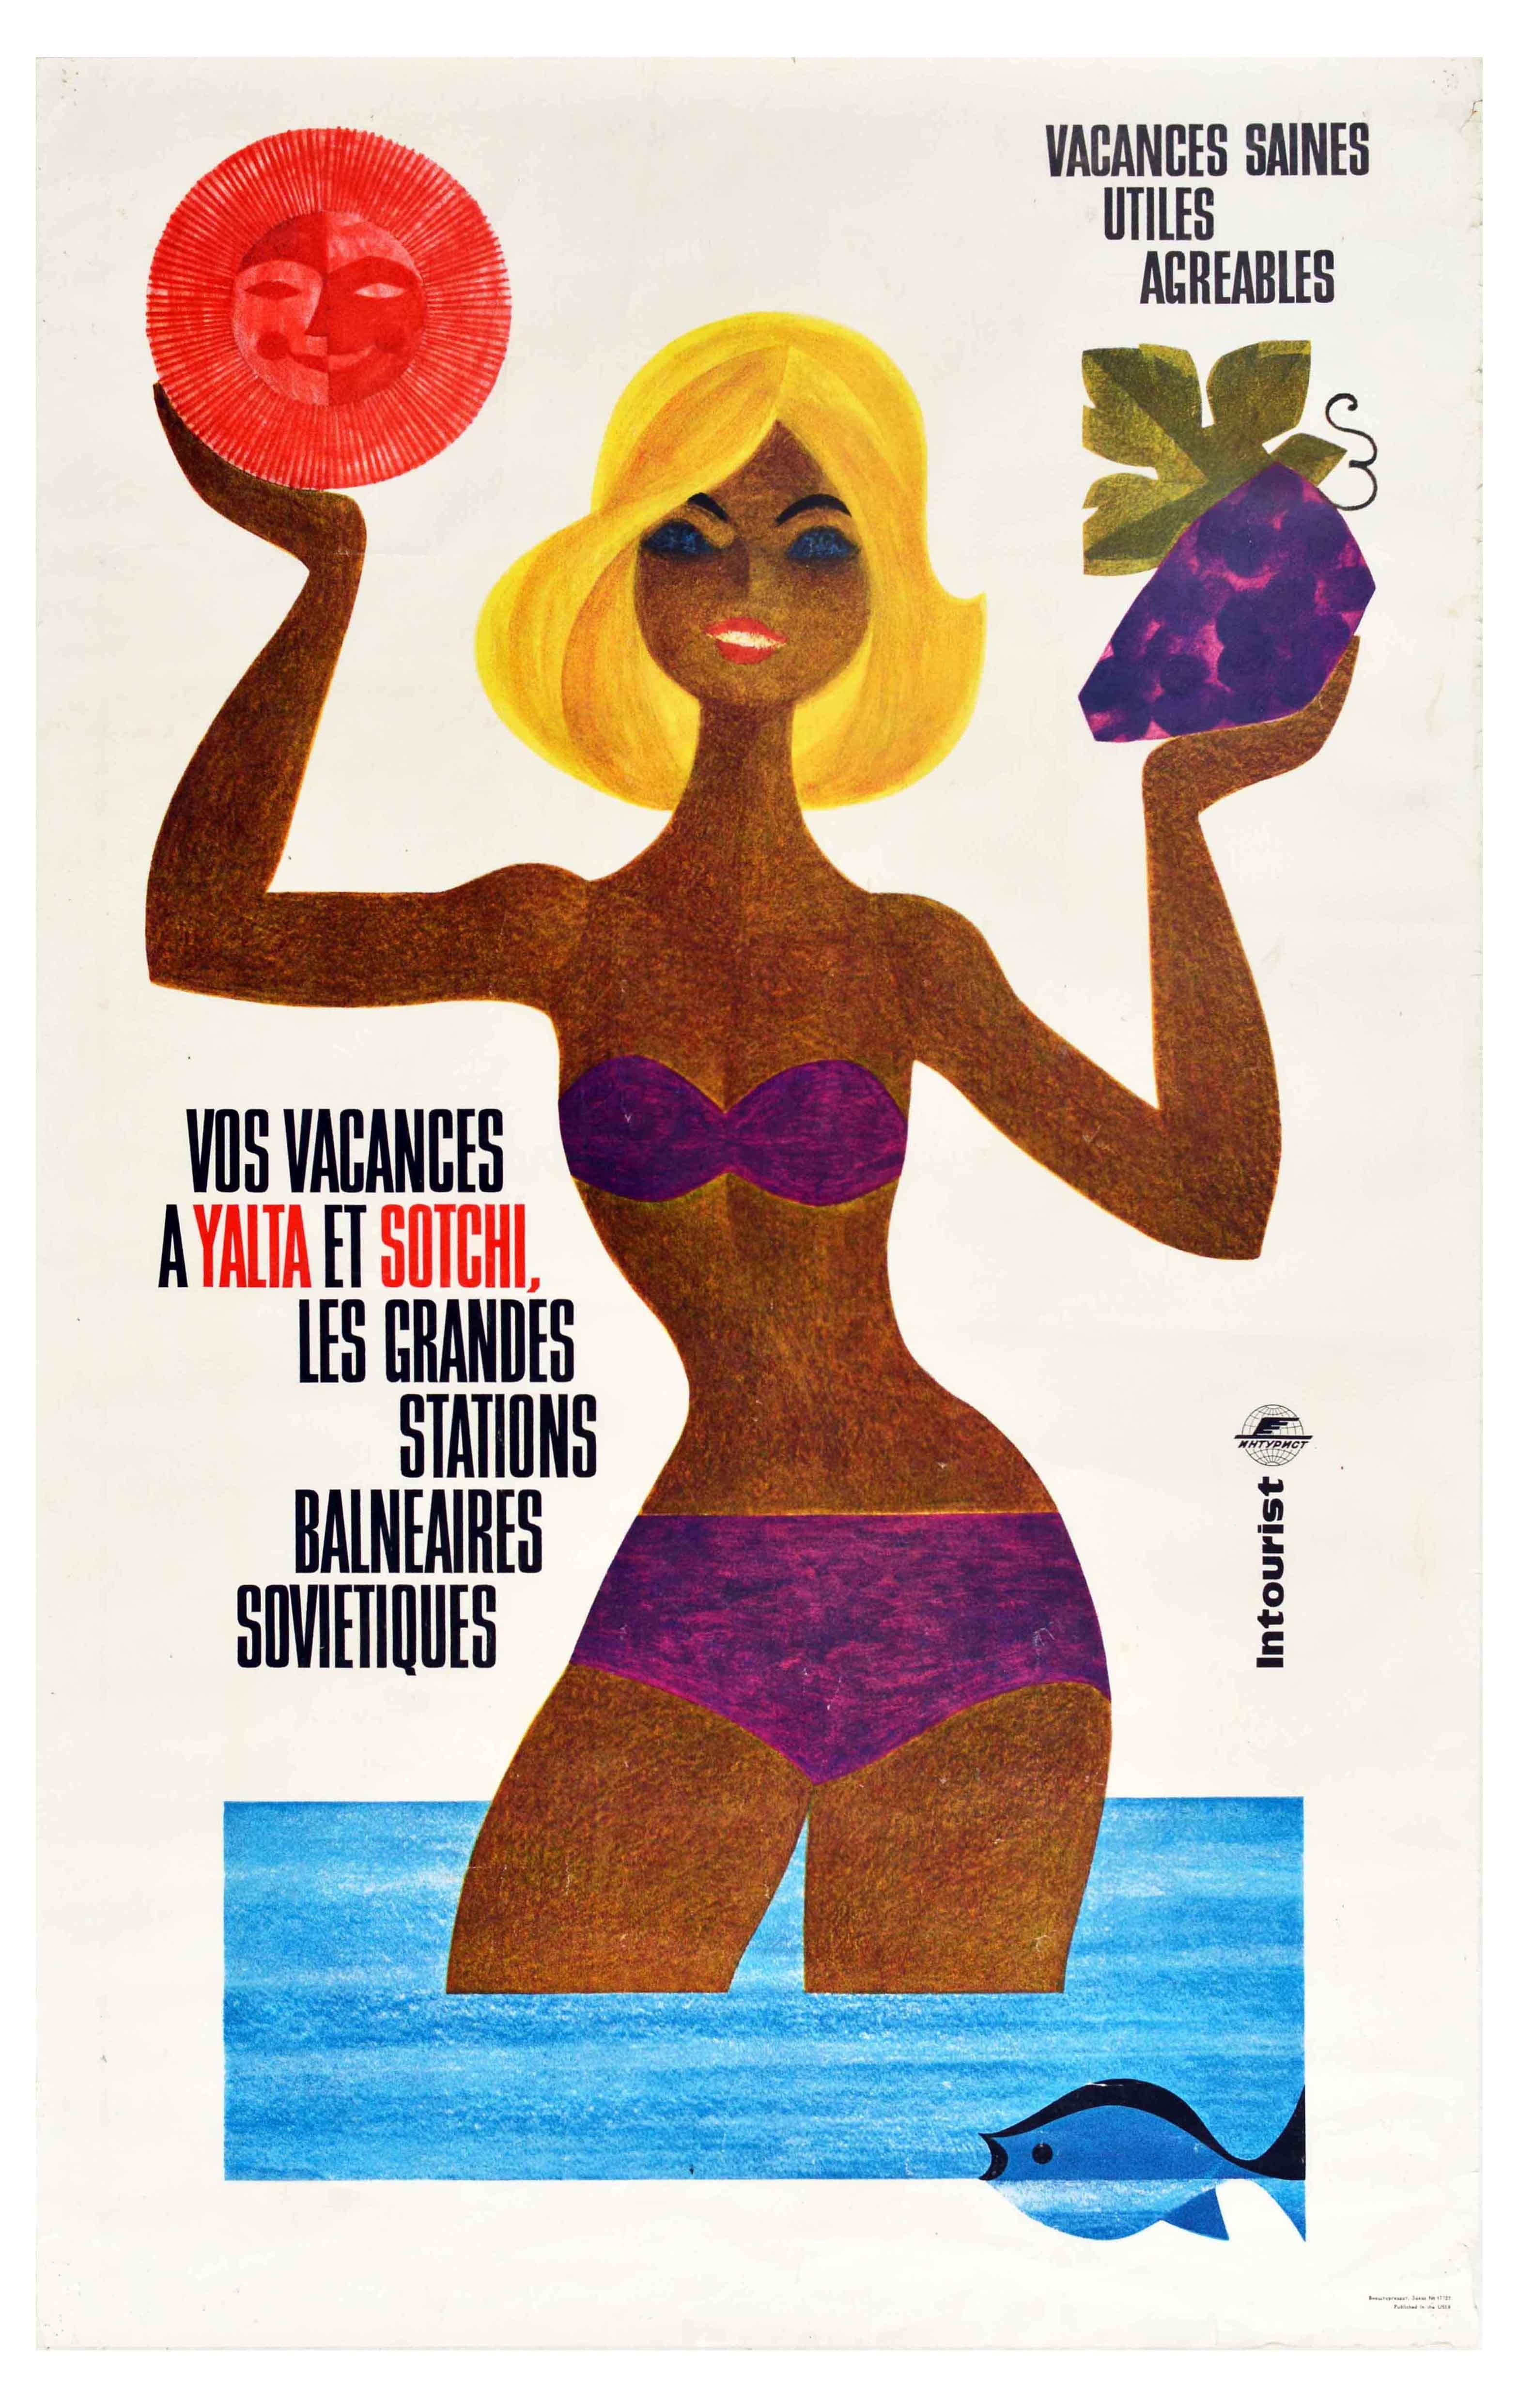 Original vintage travel poster issued by Intourist - Healthy Pleasant Holidays Your Holidays in Yalta and Sochi The Great Soviet Seaside Resorts / Vacances Saines Utiles Agreables Vos Vacances a Yalta et Sotchi Les Grandes Stations Balneaires